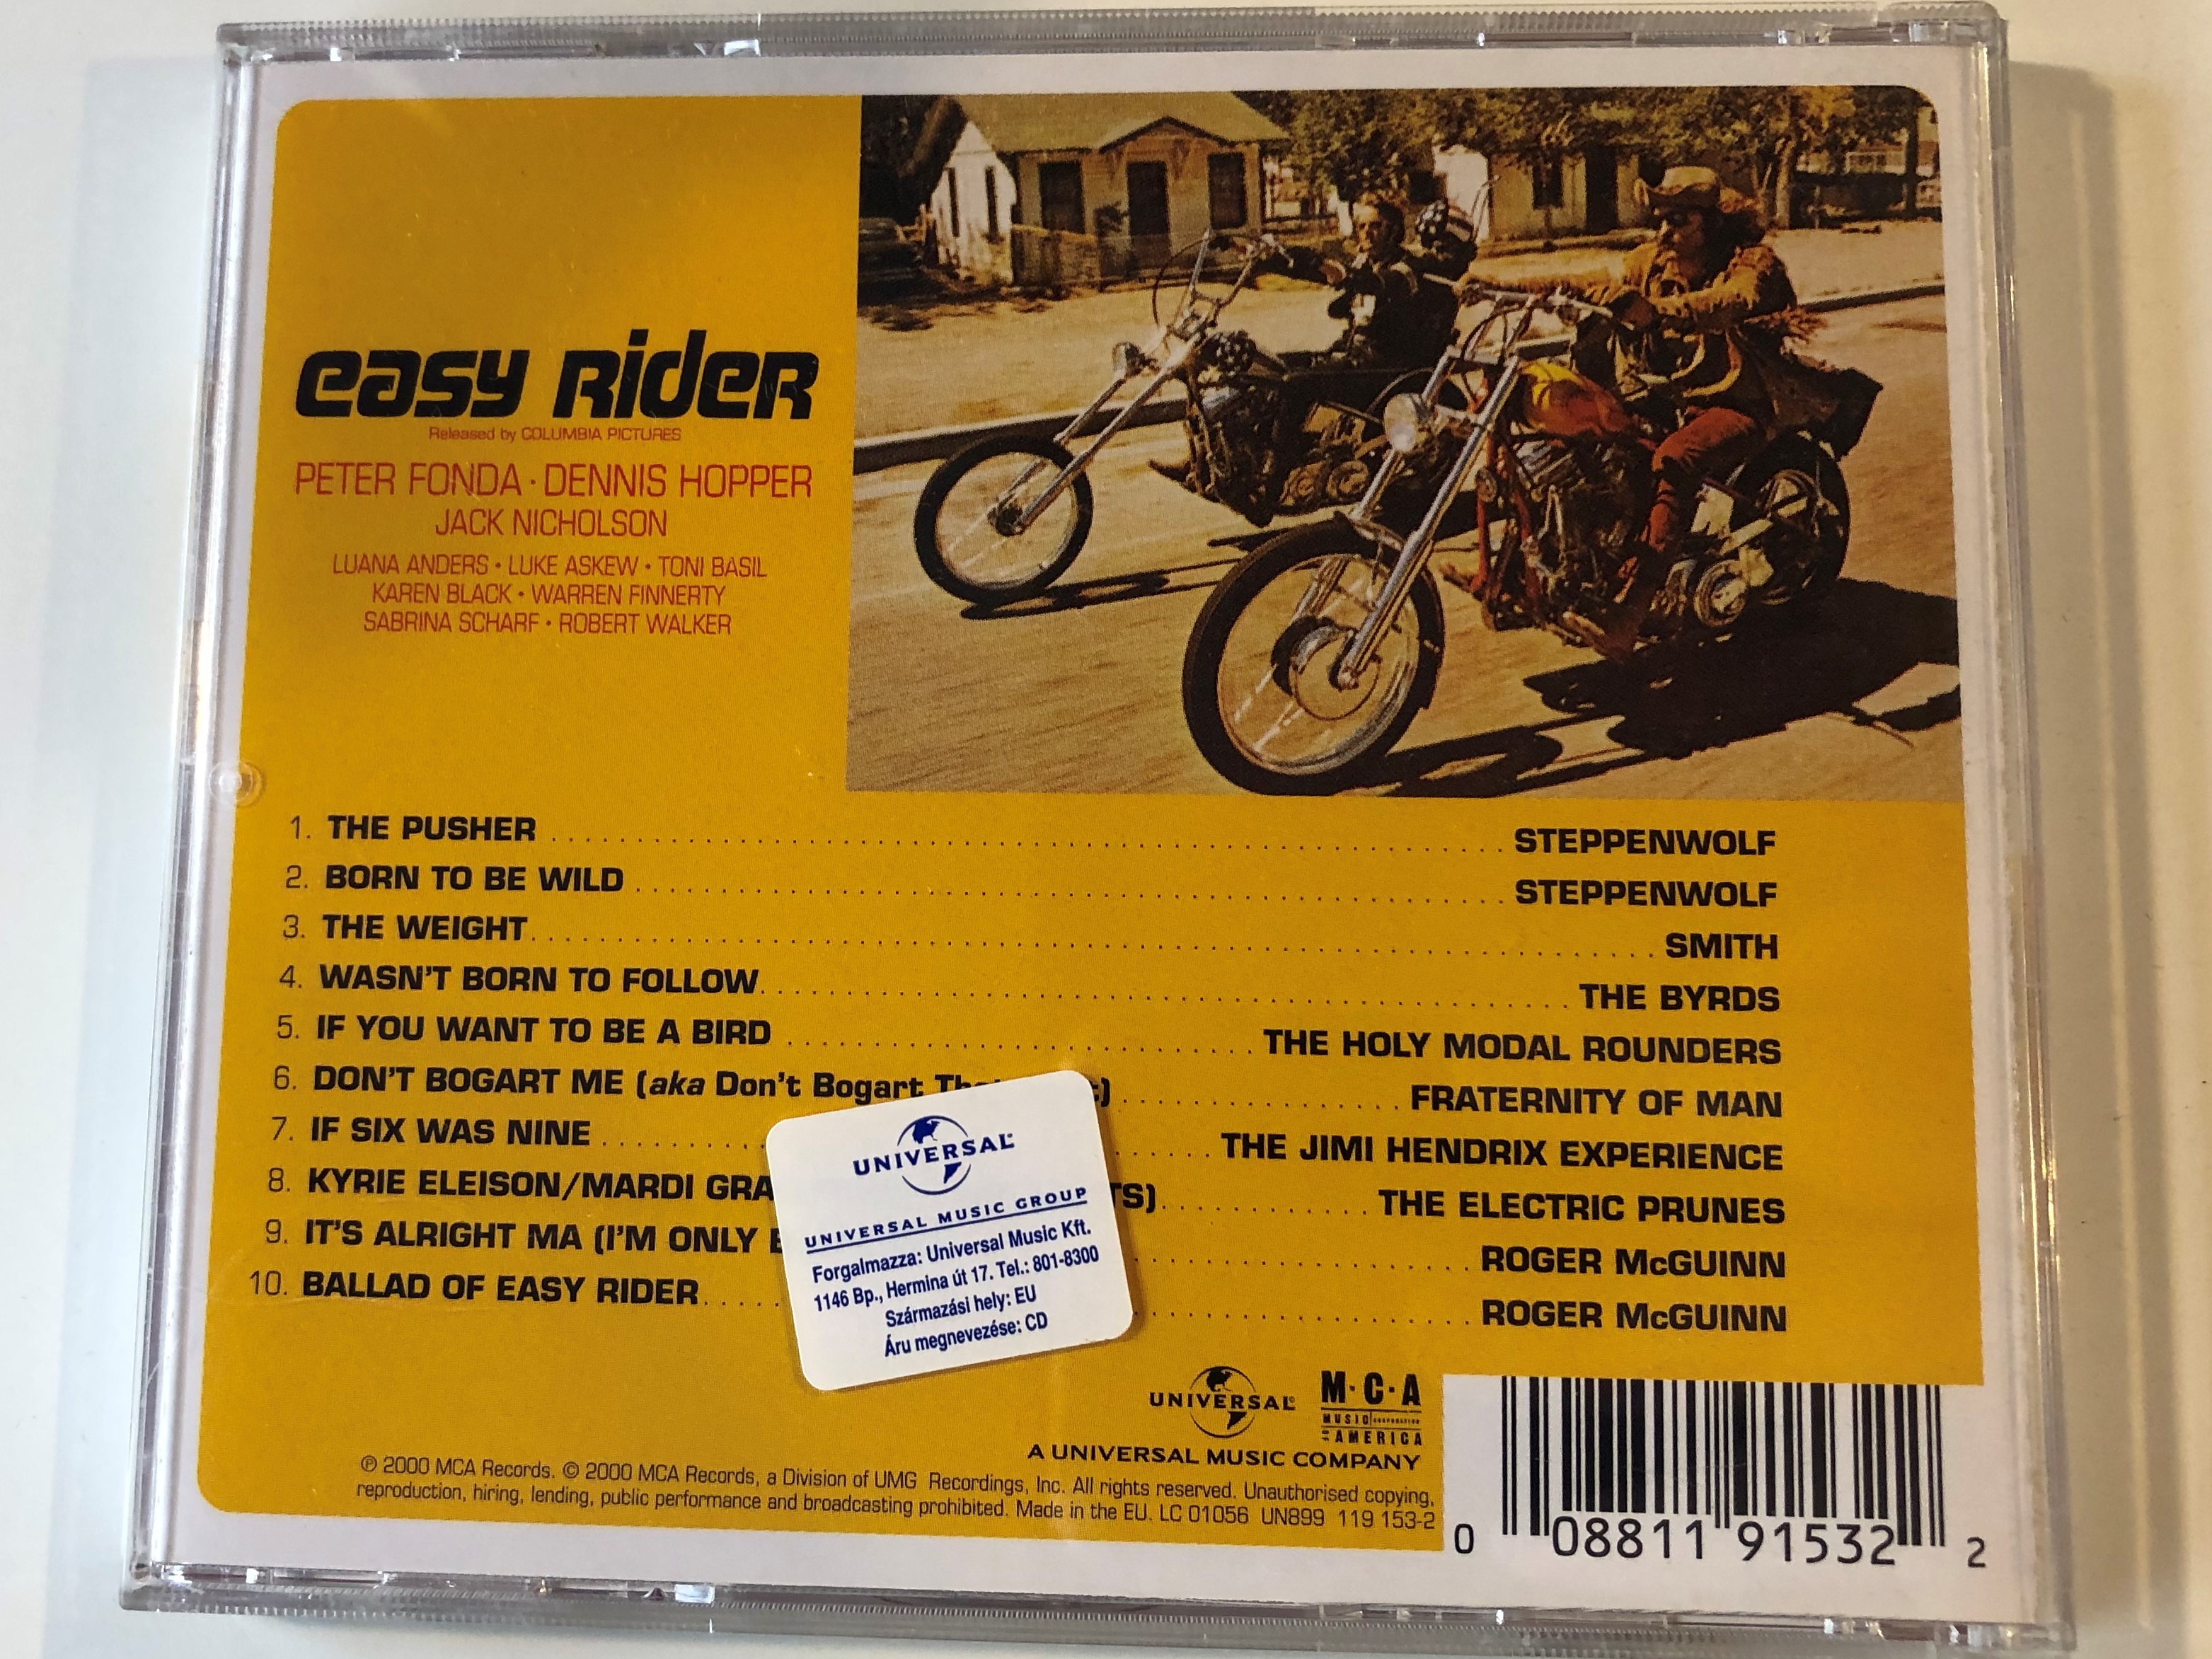 easy-rider-music-from-the-soundtrack-the-jimi-hendrix-experience-the-byrds-steppenwolf-roger-mcguinn-fraternity-of-man-electric-prunes-peter-fonda-dennis-hopper-jack-nicholson-mca-4-.jpg